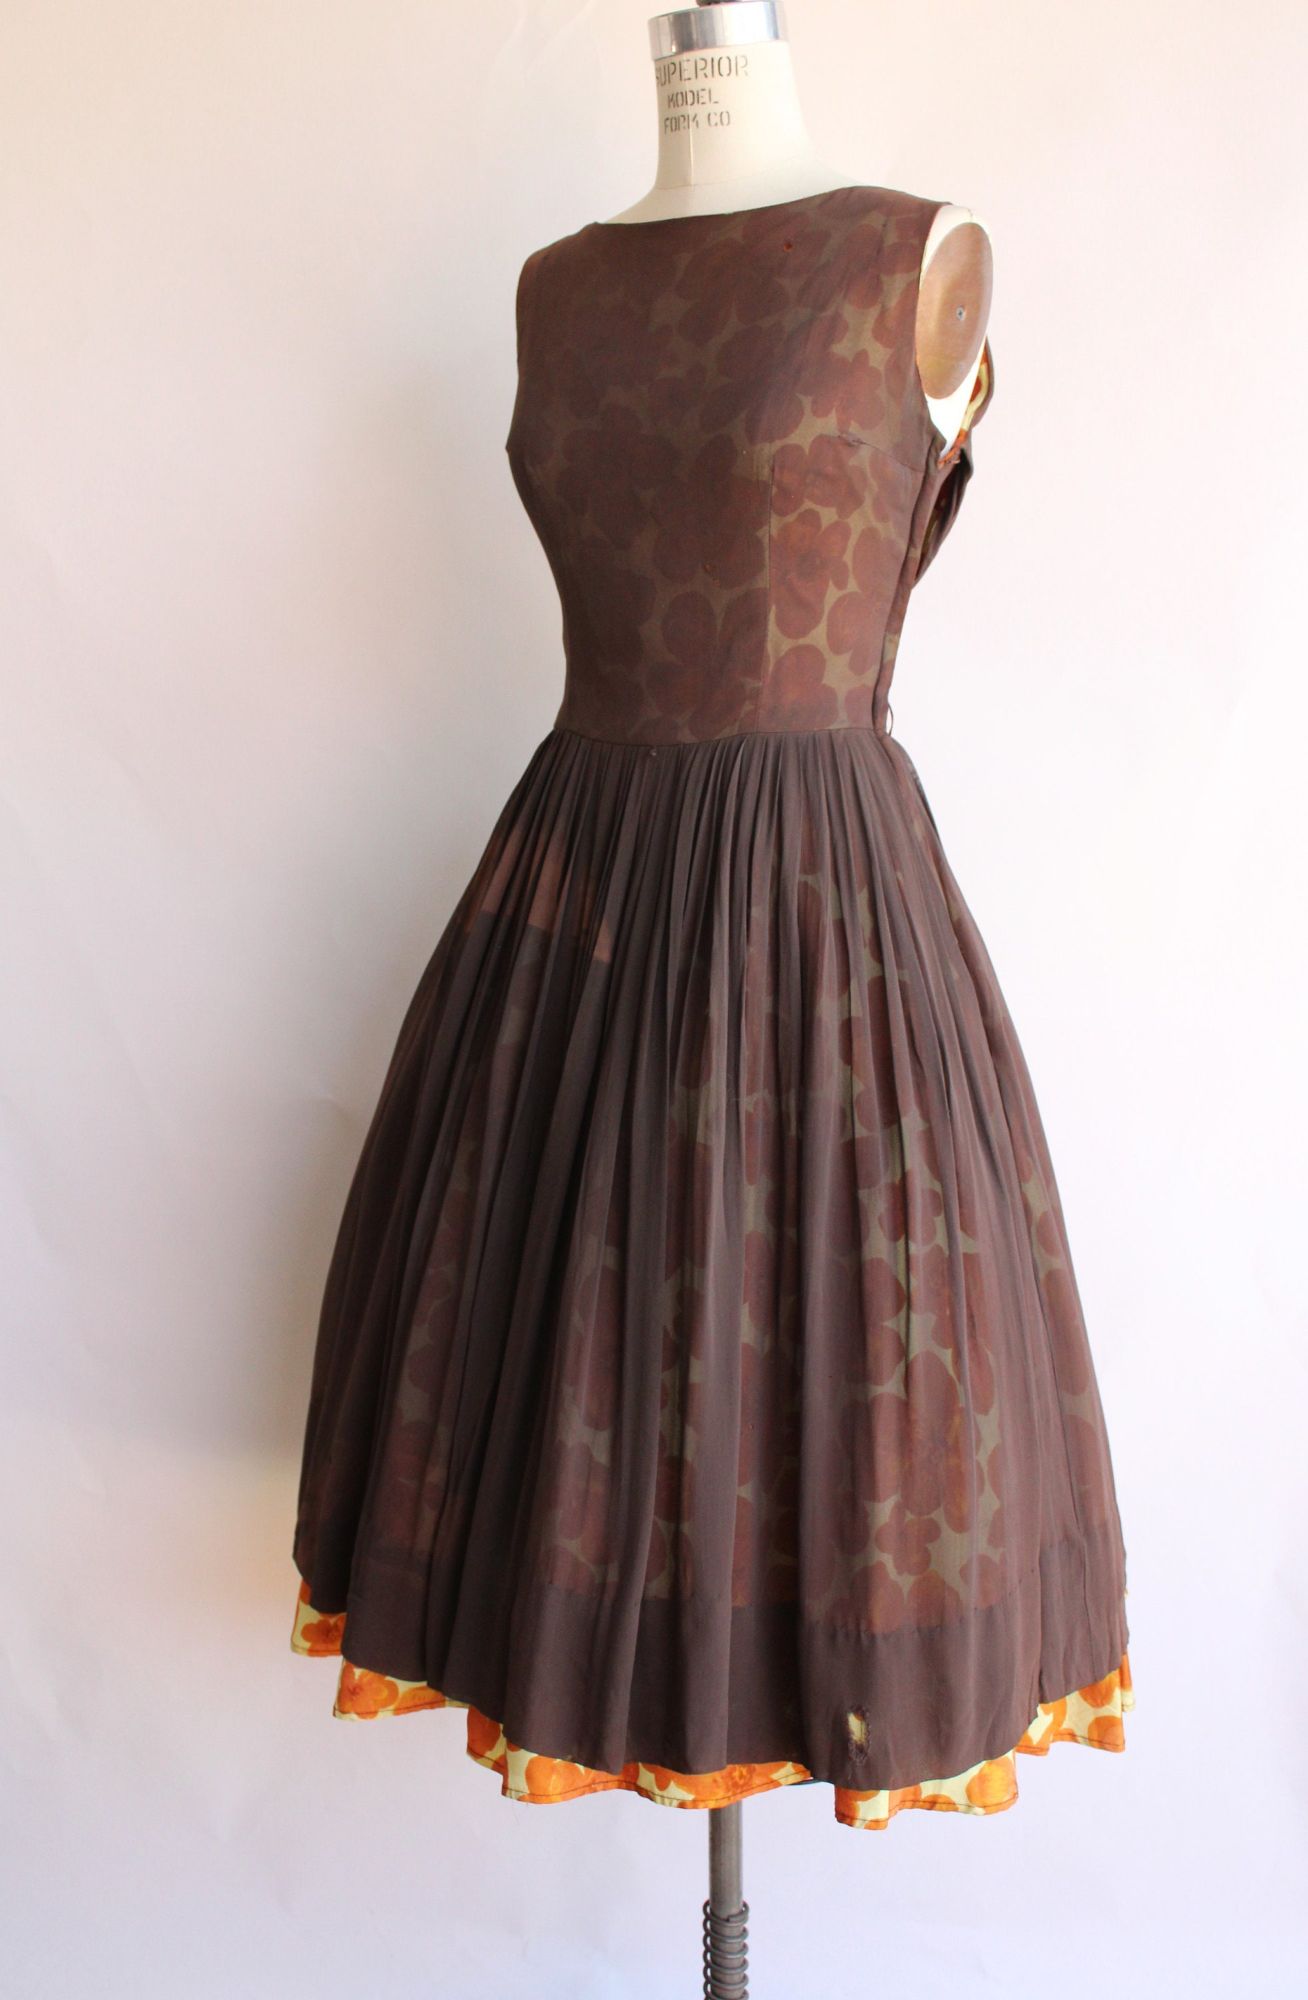 Vintage 1950s Yellow and Brown Floral Fit And Flare Dress